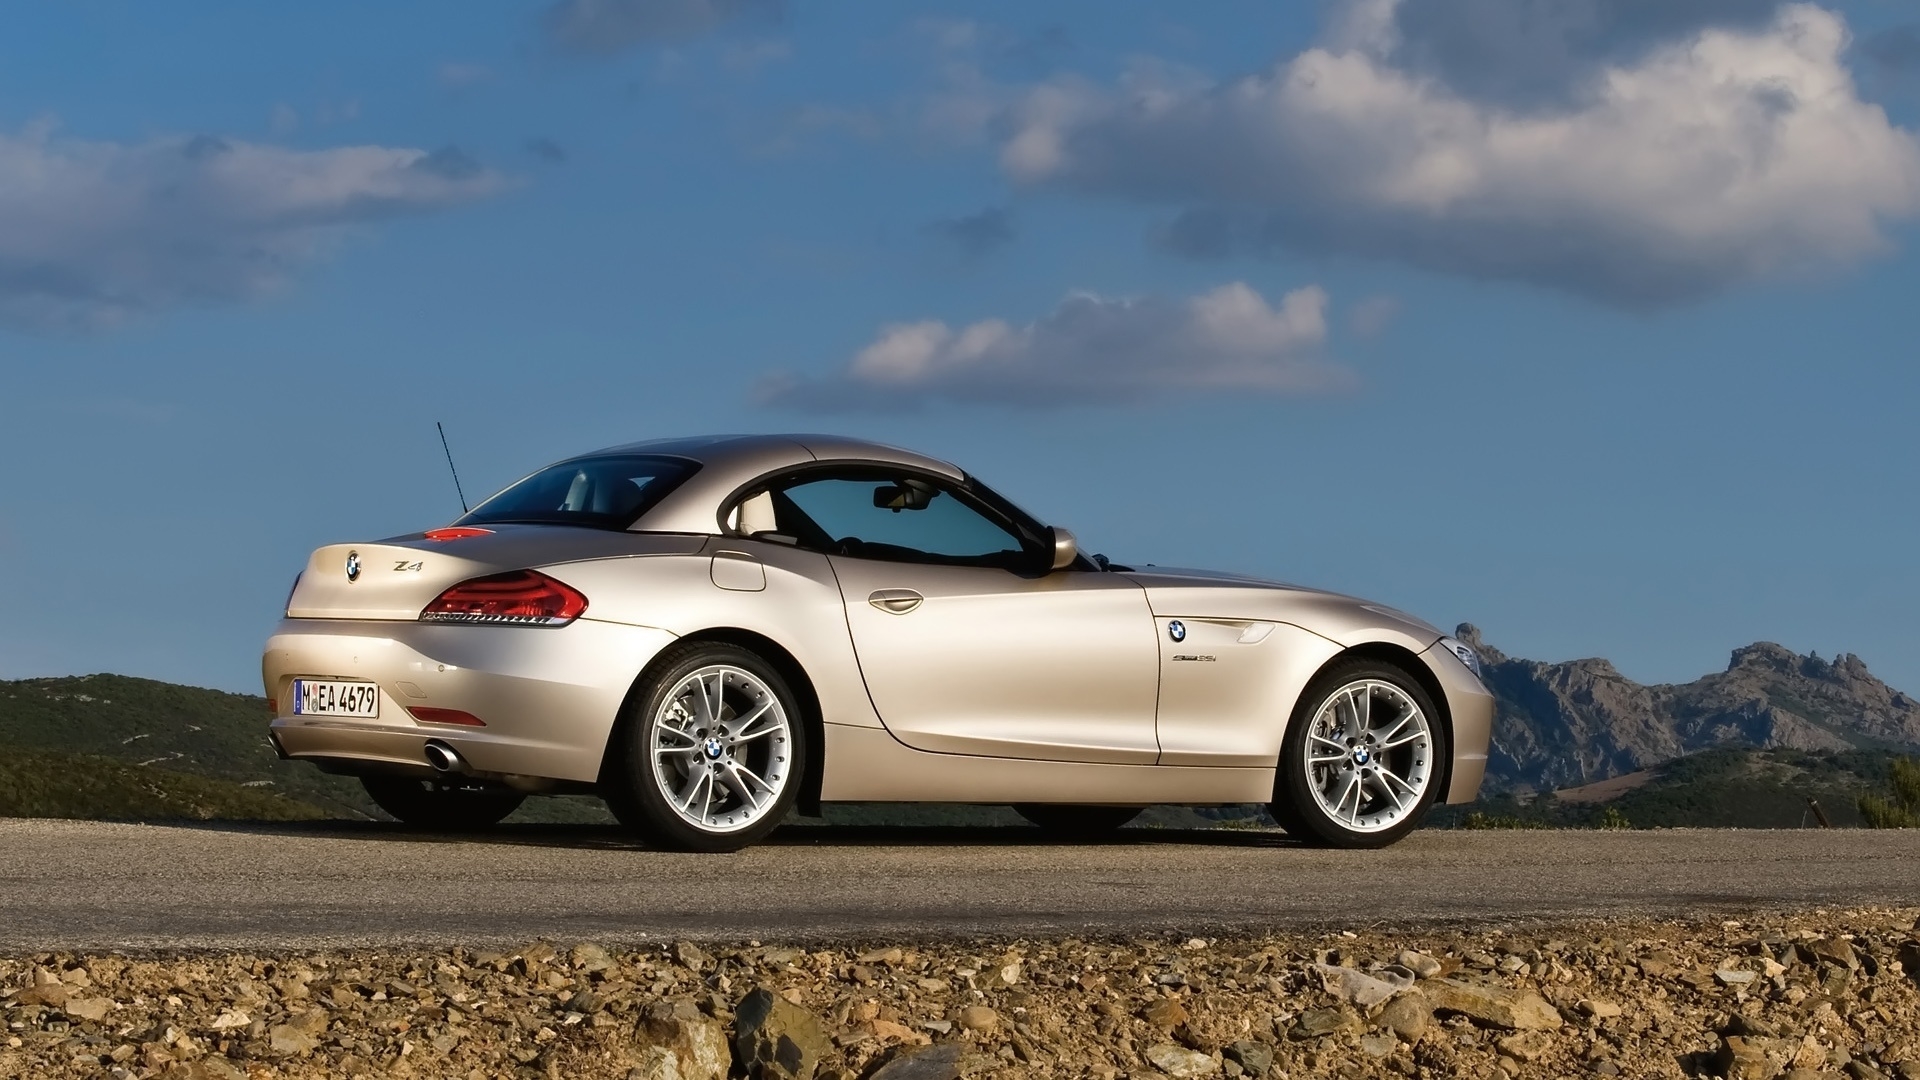 BMW Z4 Roadster Top Up 2009 for 1920 x 1080 HDTV 1080p resolution